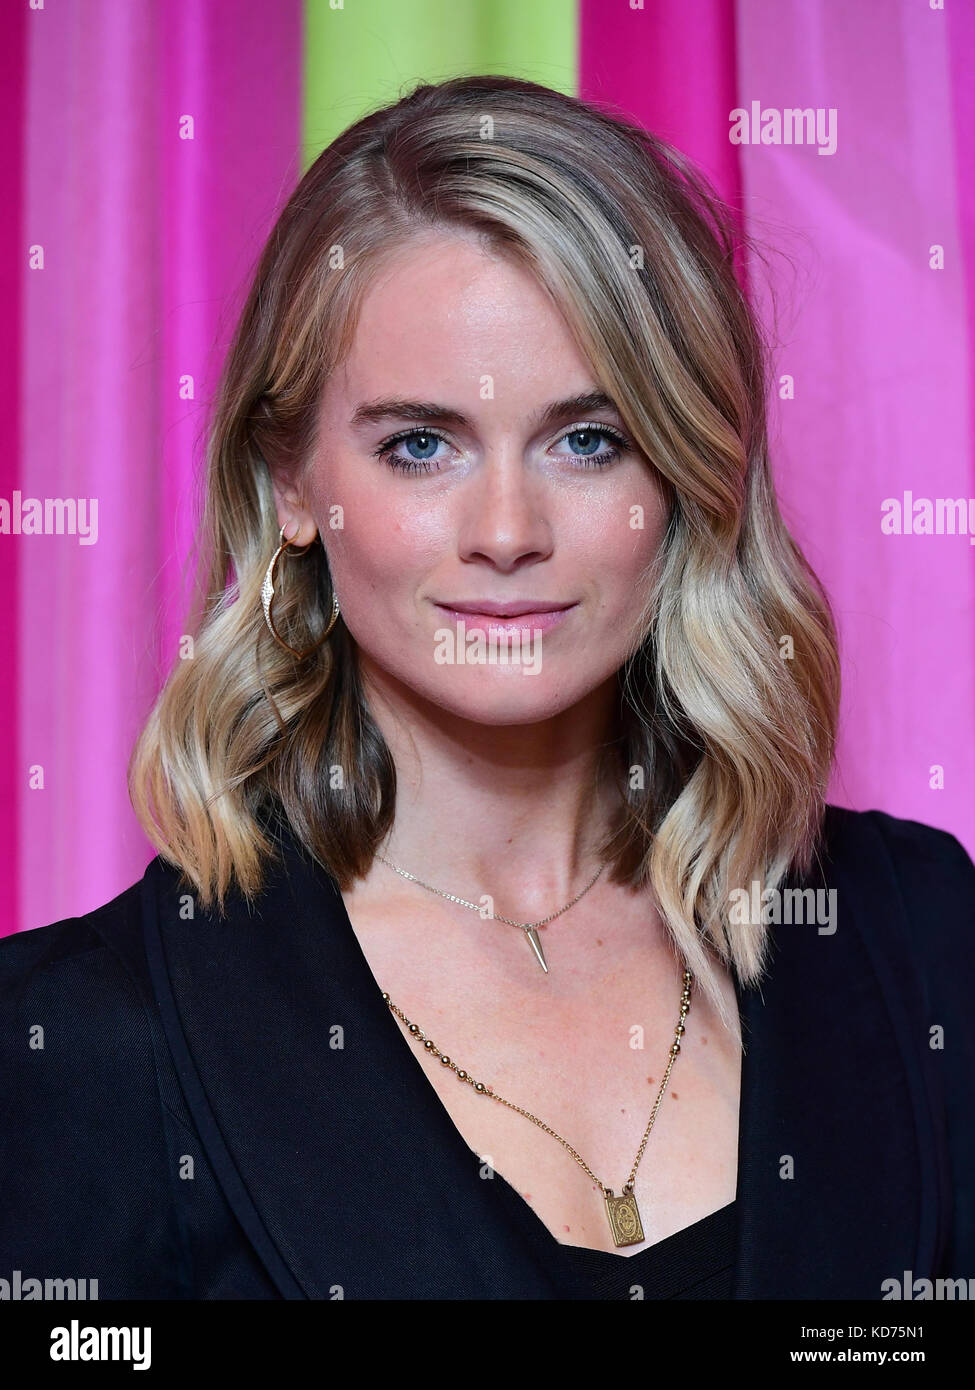 Cressida Bonas attending the premiere of Double Date, held at the Soho Hotel, London. Picture Date: Tuesday 10 October. Photo credit should read: Ian West/PA Wire Stock Photo